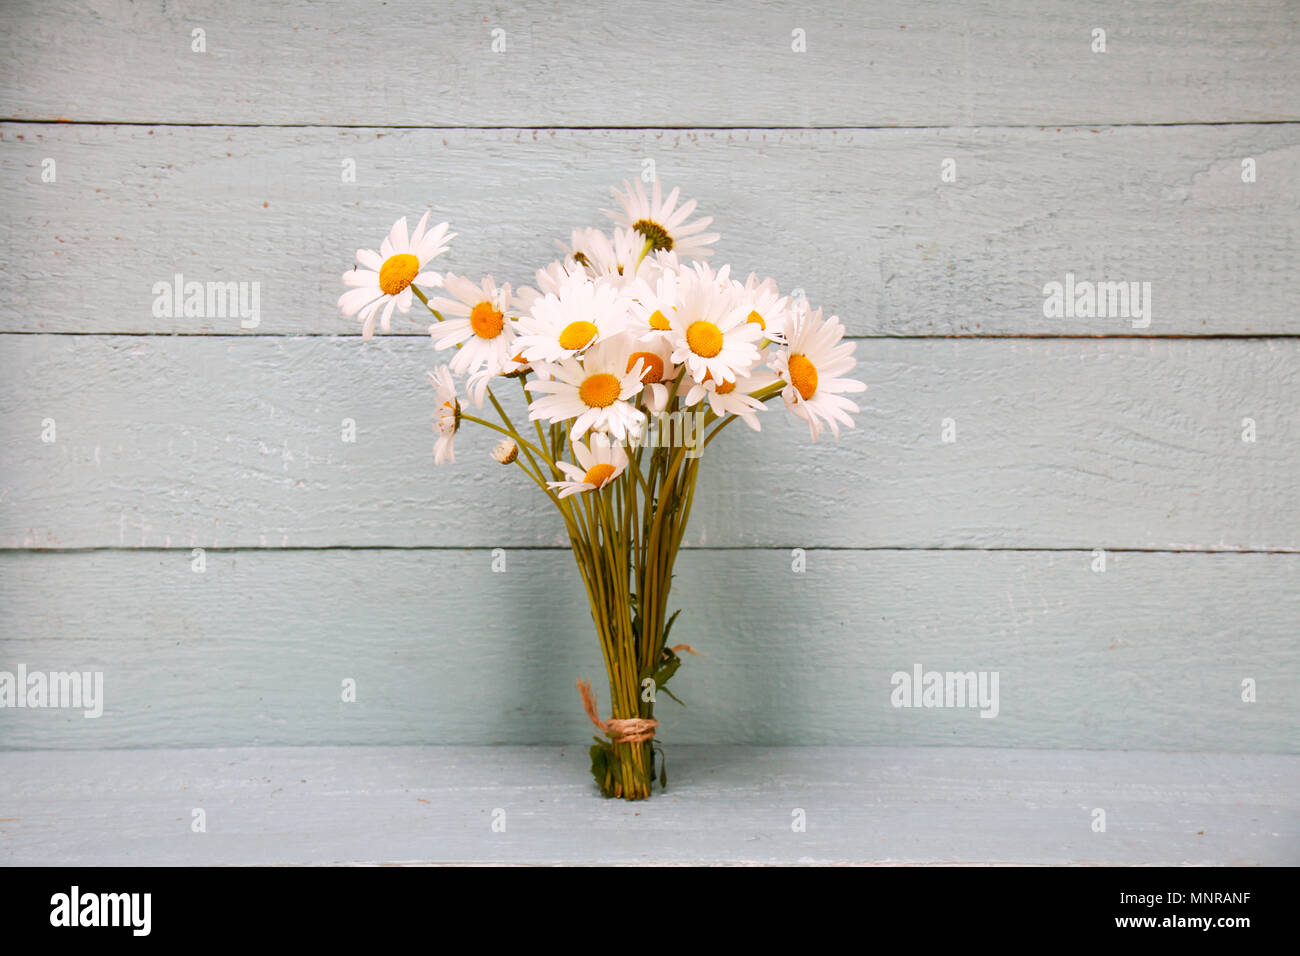 Bunch of Daisy flowers- healing plant Stock Photo